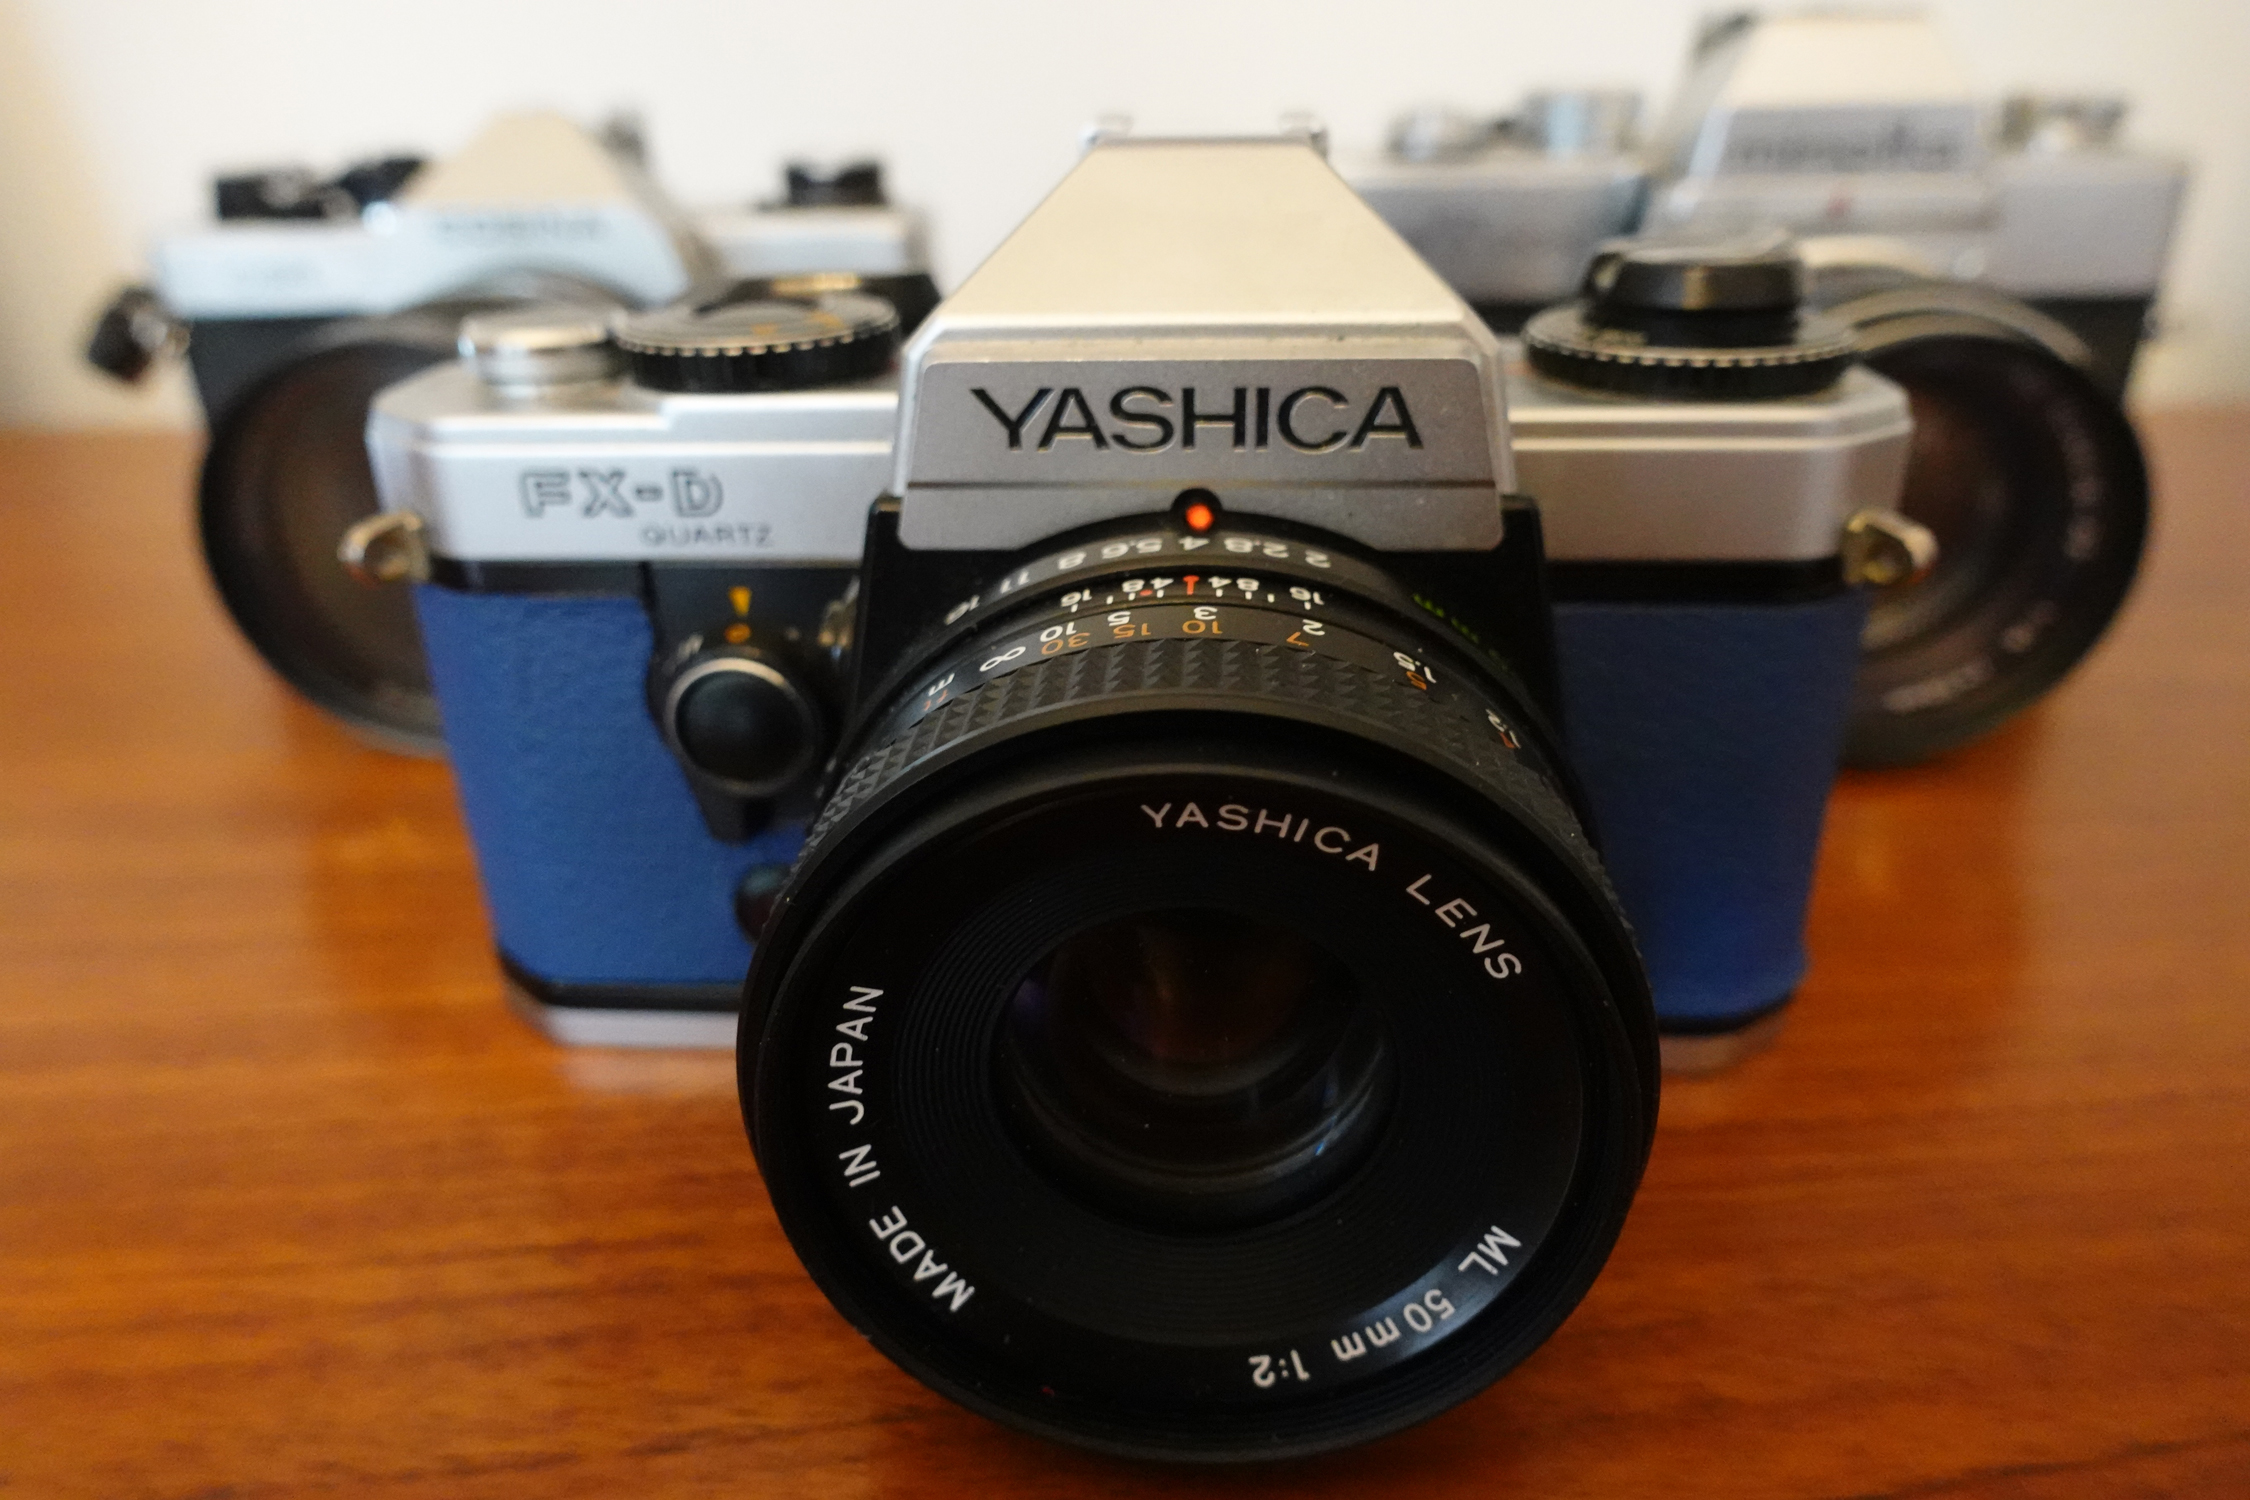 Yashica FX-D and other cameras (Pic: Stephen Dowling)